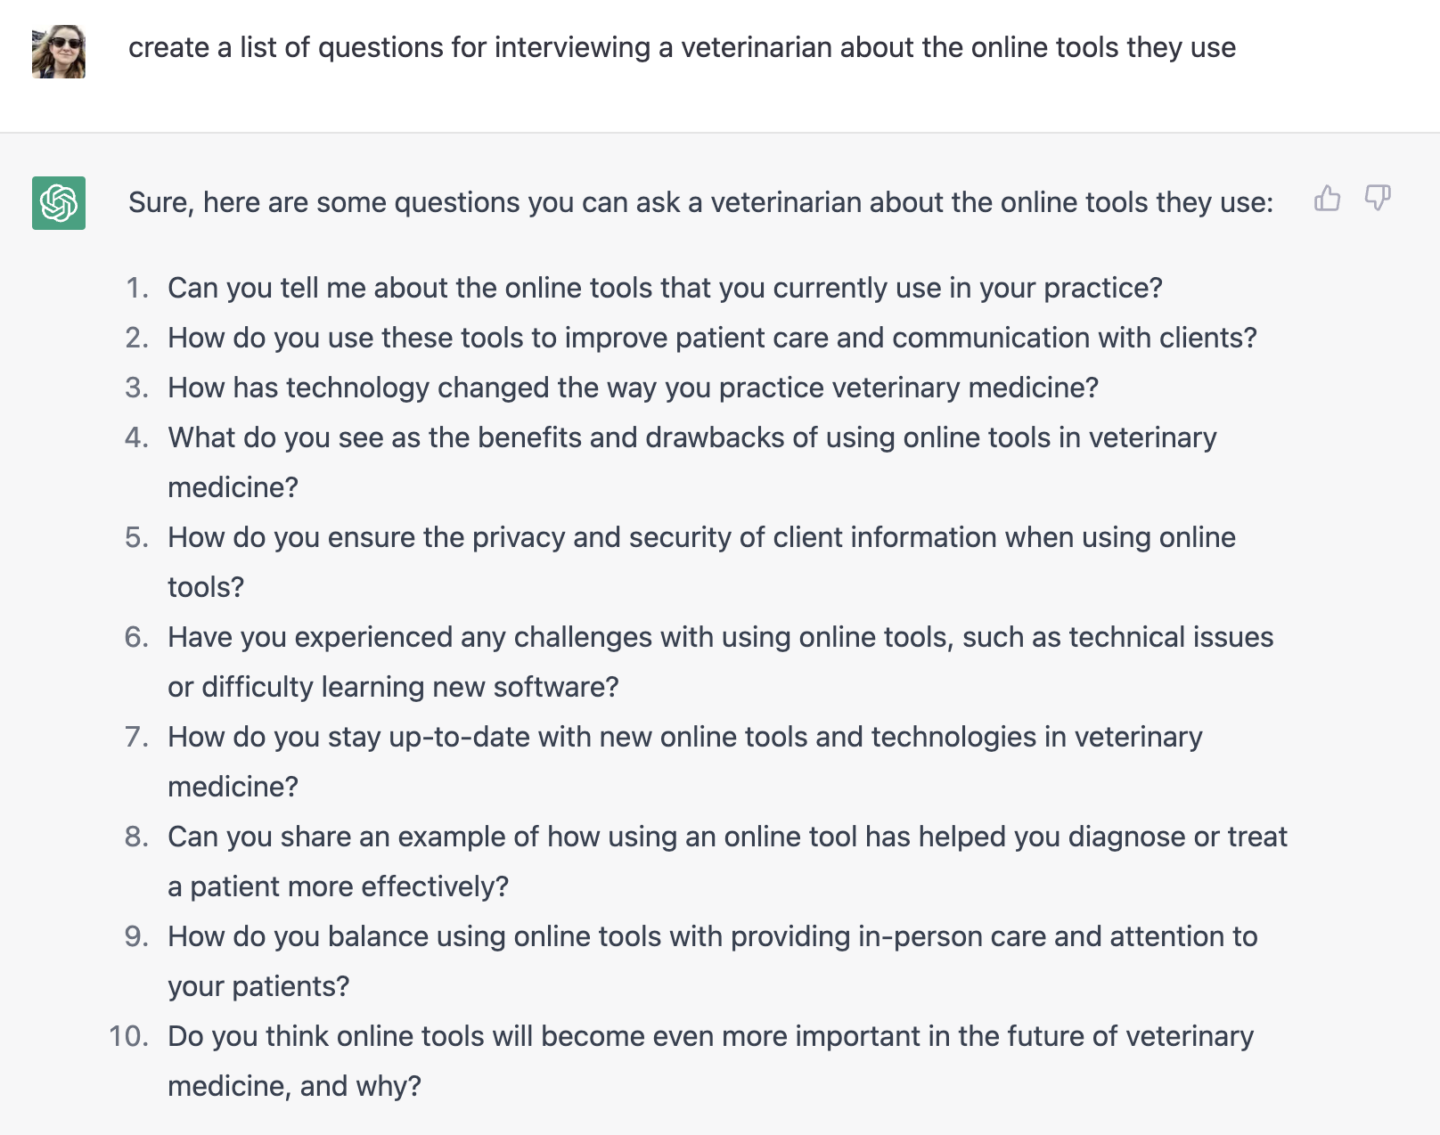 Asking ChatGPT for a list of questions for interviewing a veterinarian about the online tools they use. The AI responded with 10 questions.